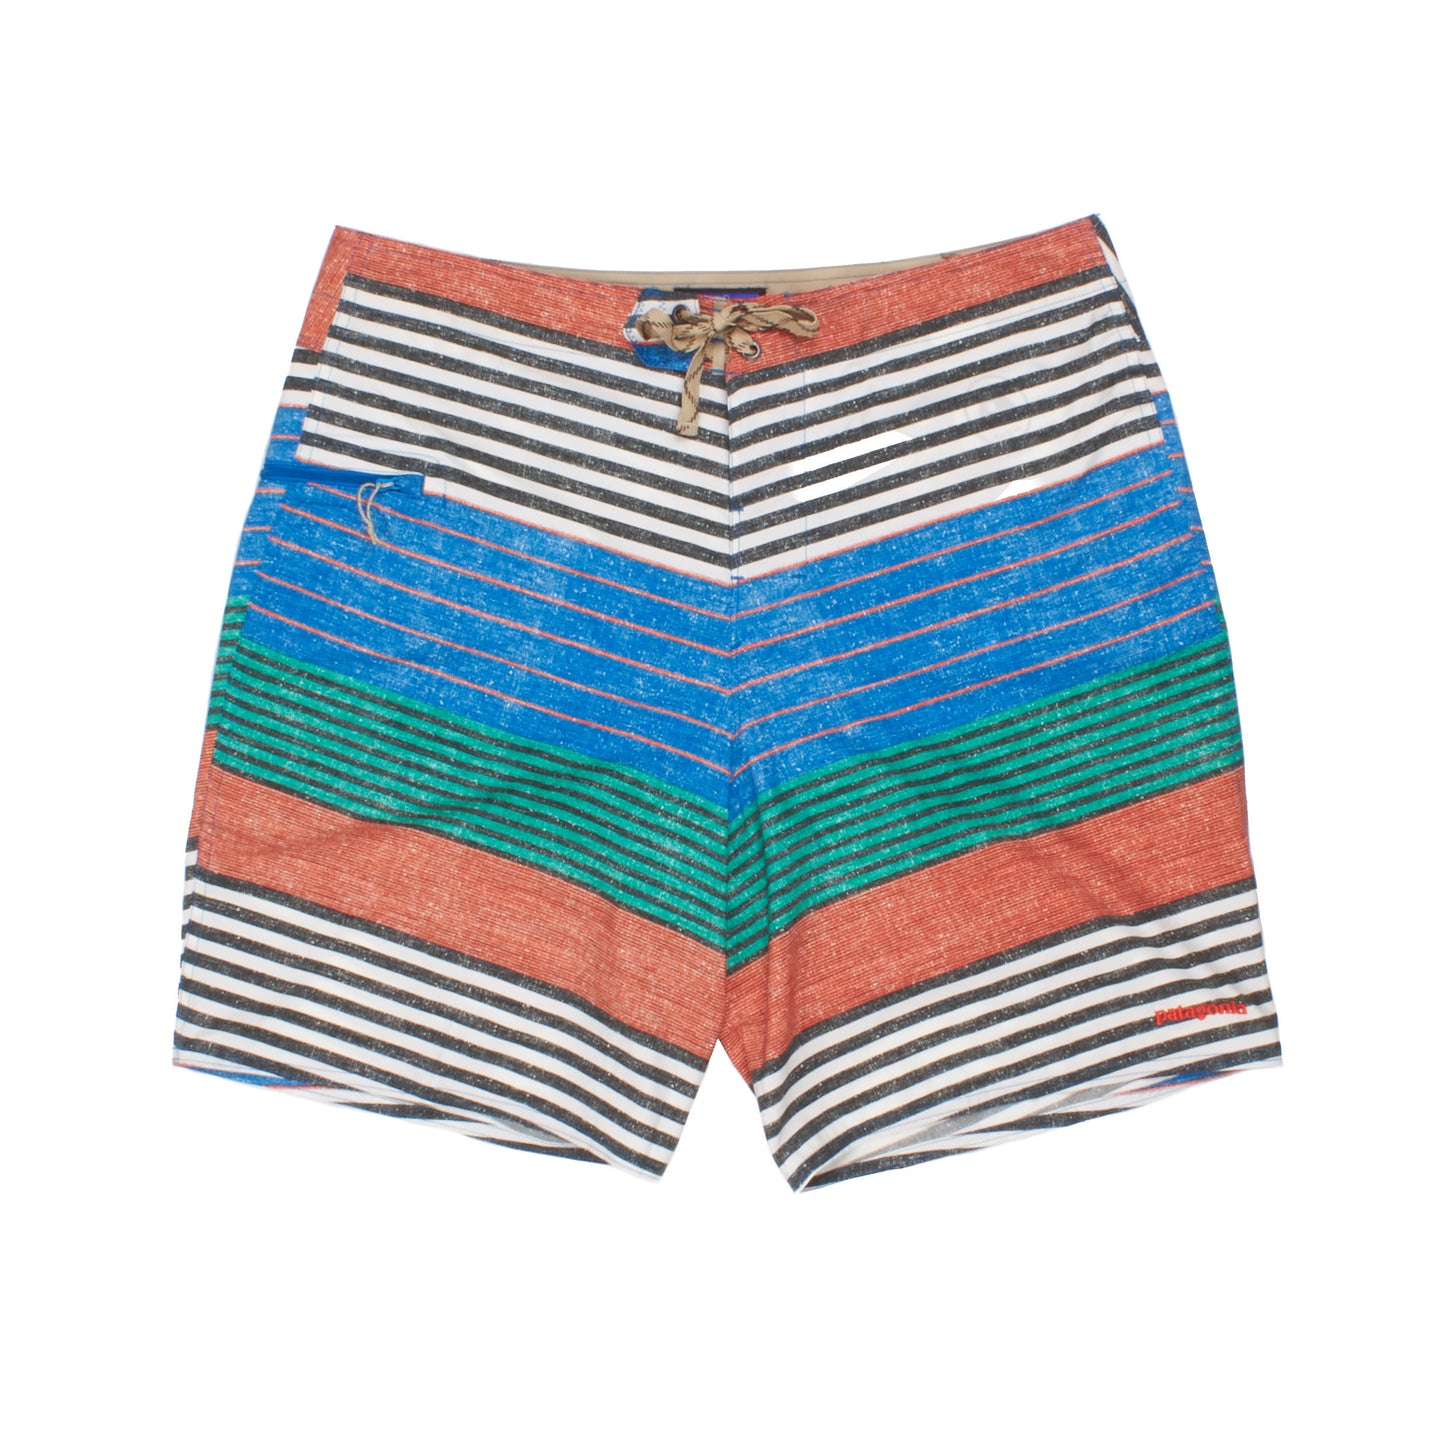 Men's Printed Stretch Planing Board Shorts - 20"